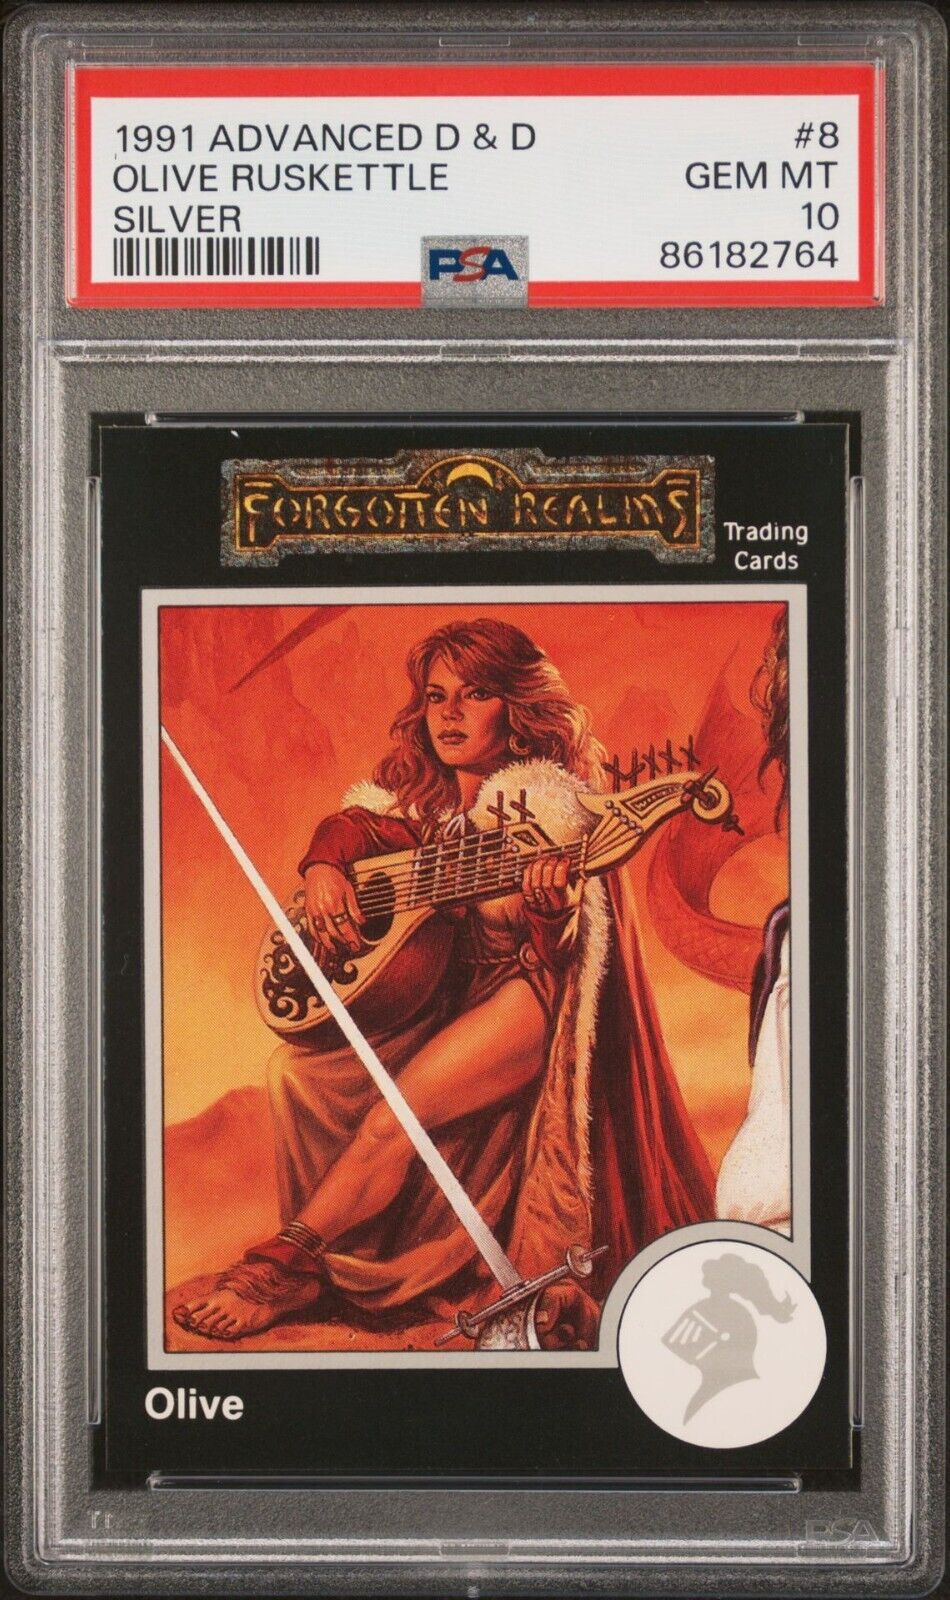 1991 Advanced Dungeons & Dragons Trading Cards Silver - Olive Ruskettle - PSA 10